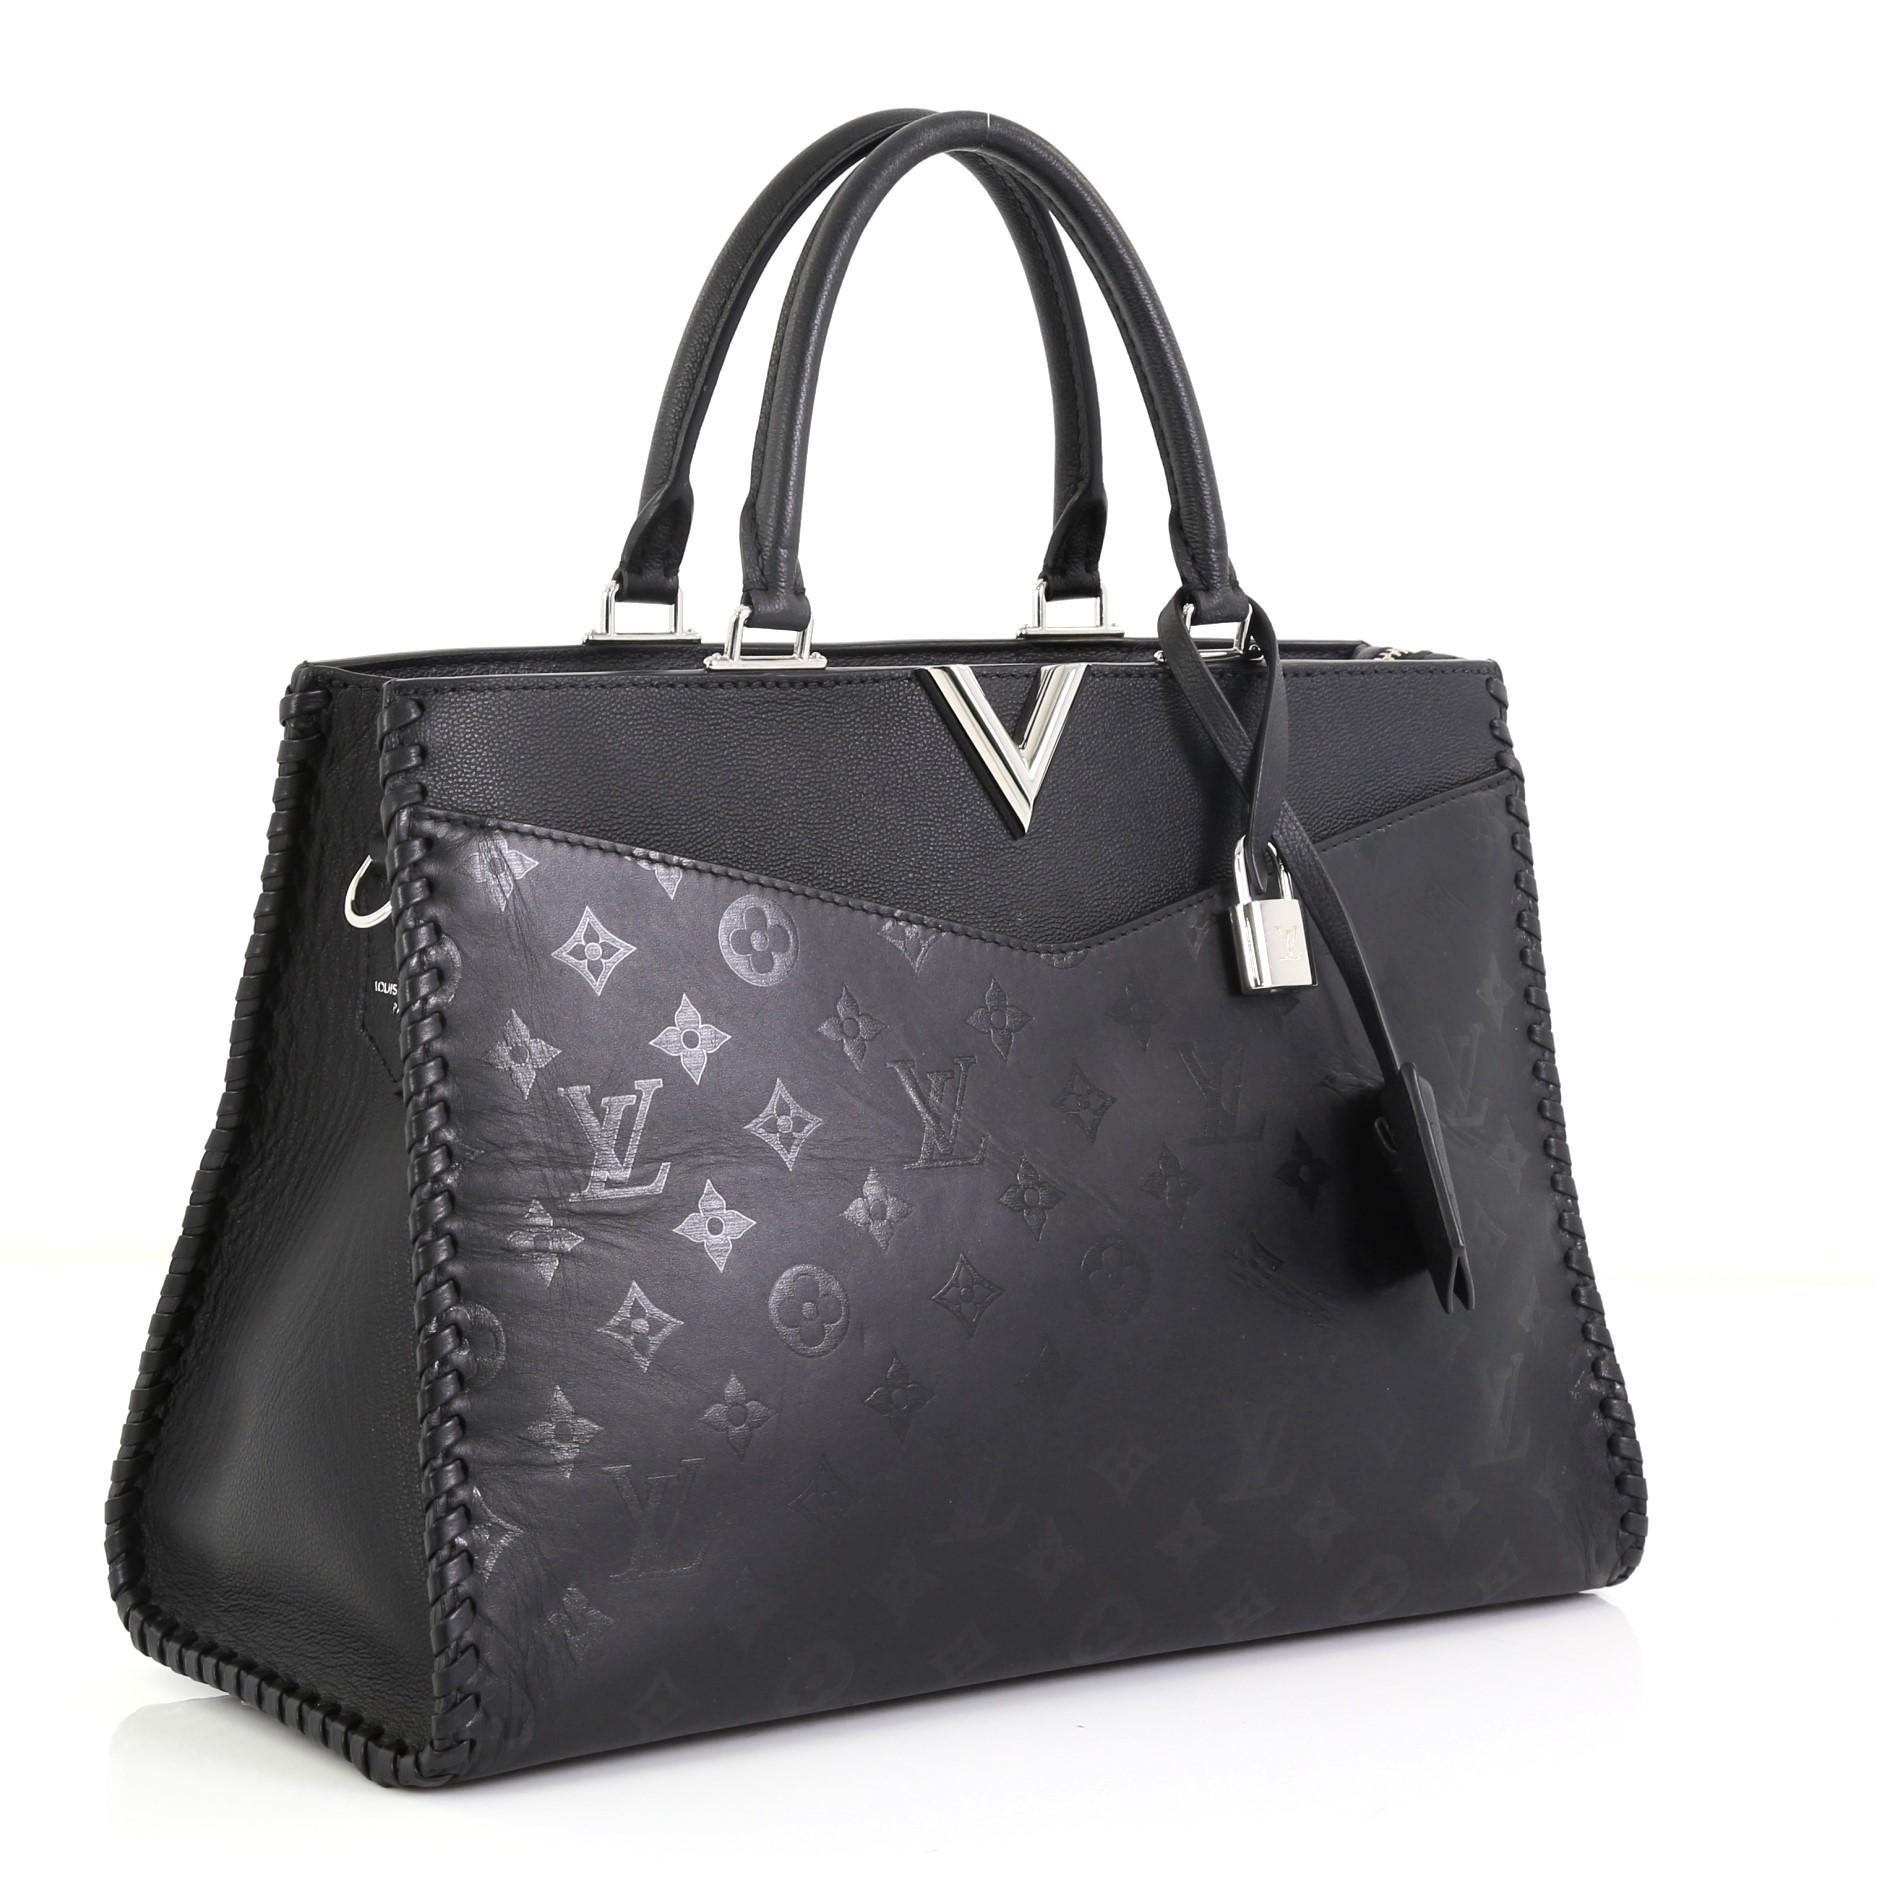 This Louis Vuitton Very Zipped Tote Monogram Leather, crafted in black monogram leather with grained leather trims, features dual-rolled leather handles, an attached V logo, whipstitched edges, exterior front flat pocket, and silver-tone hardware.